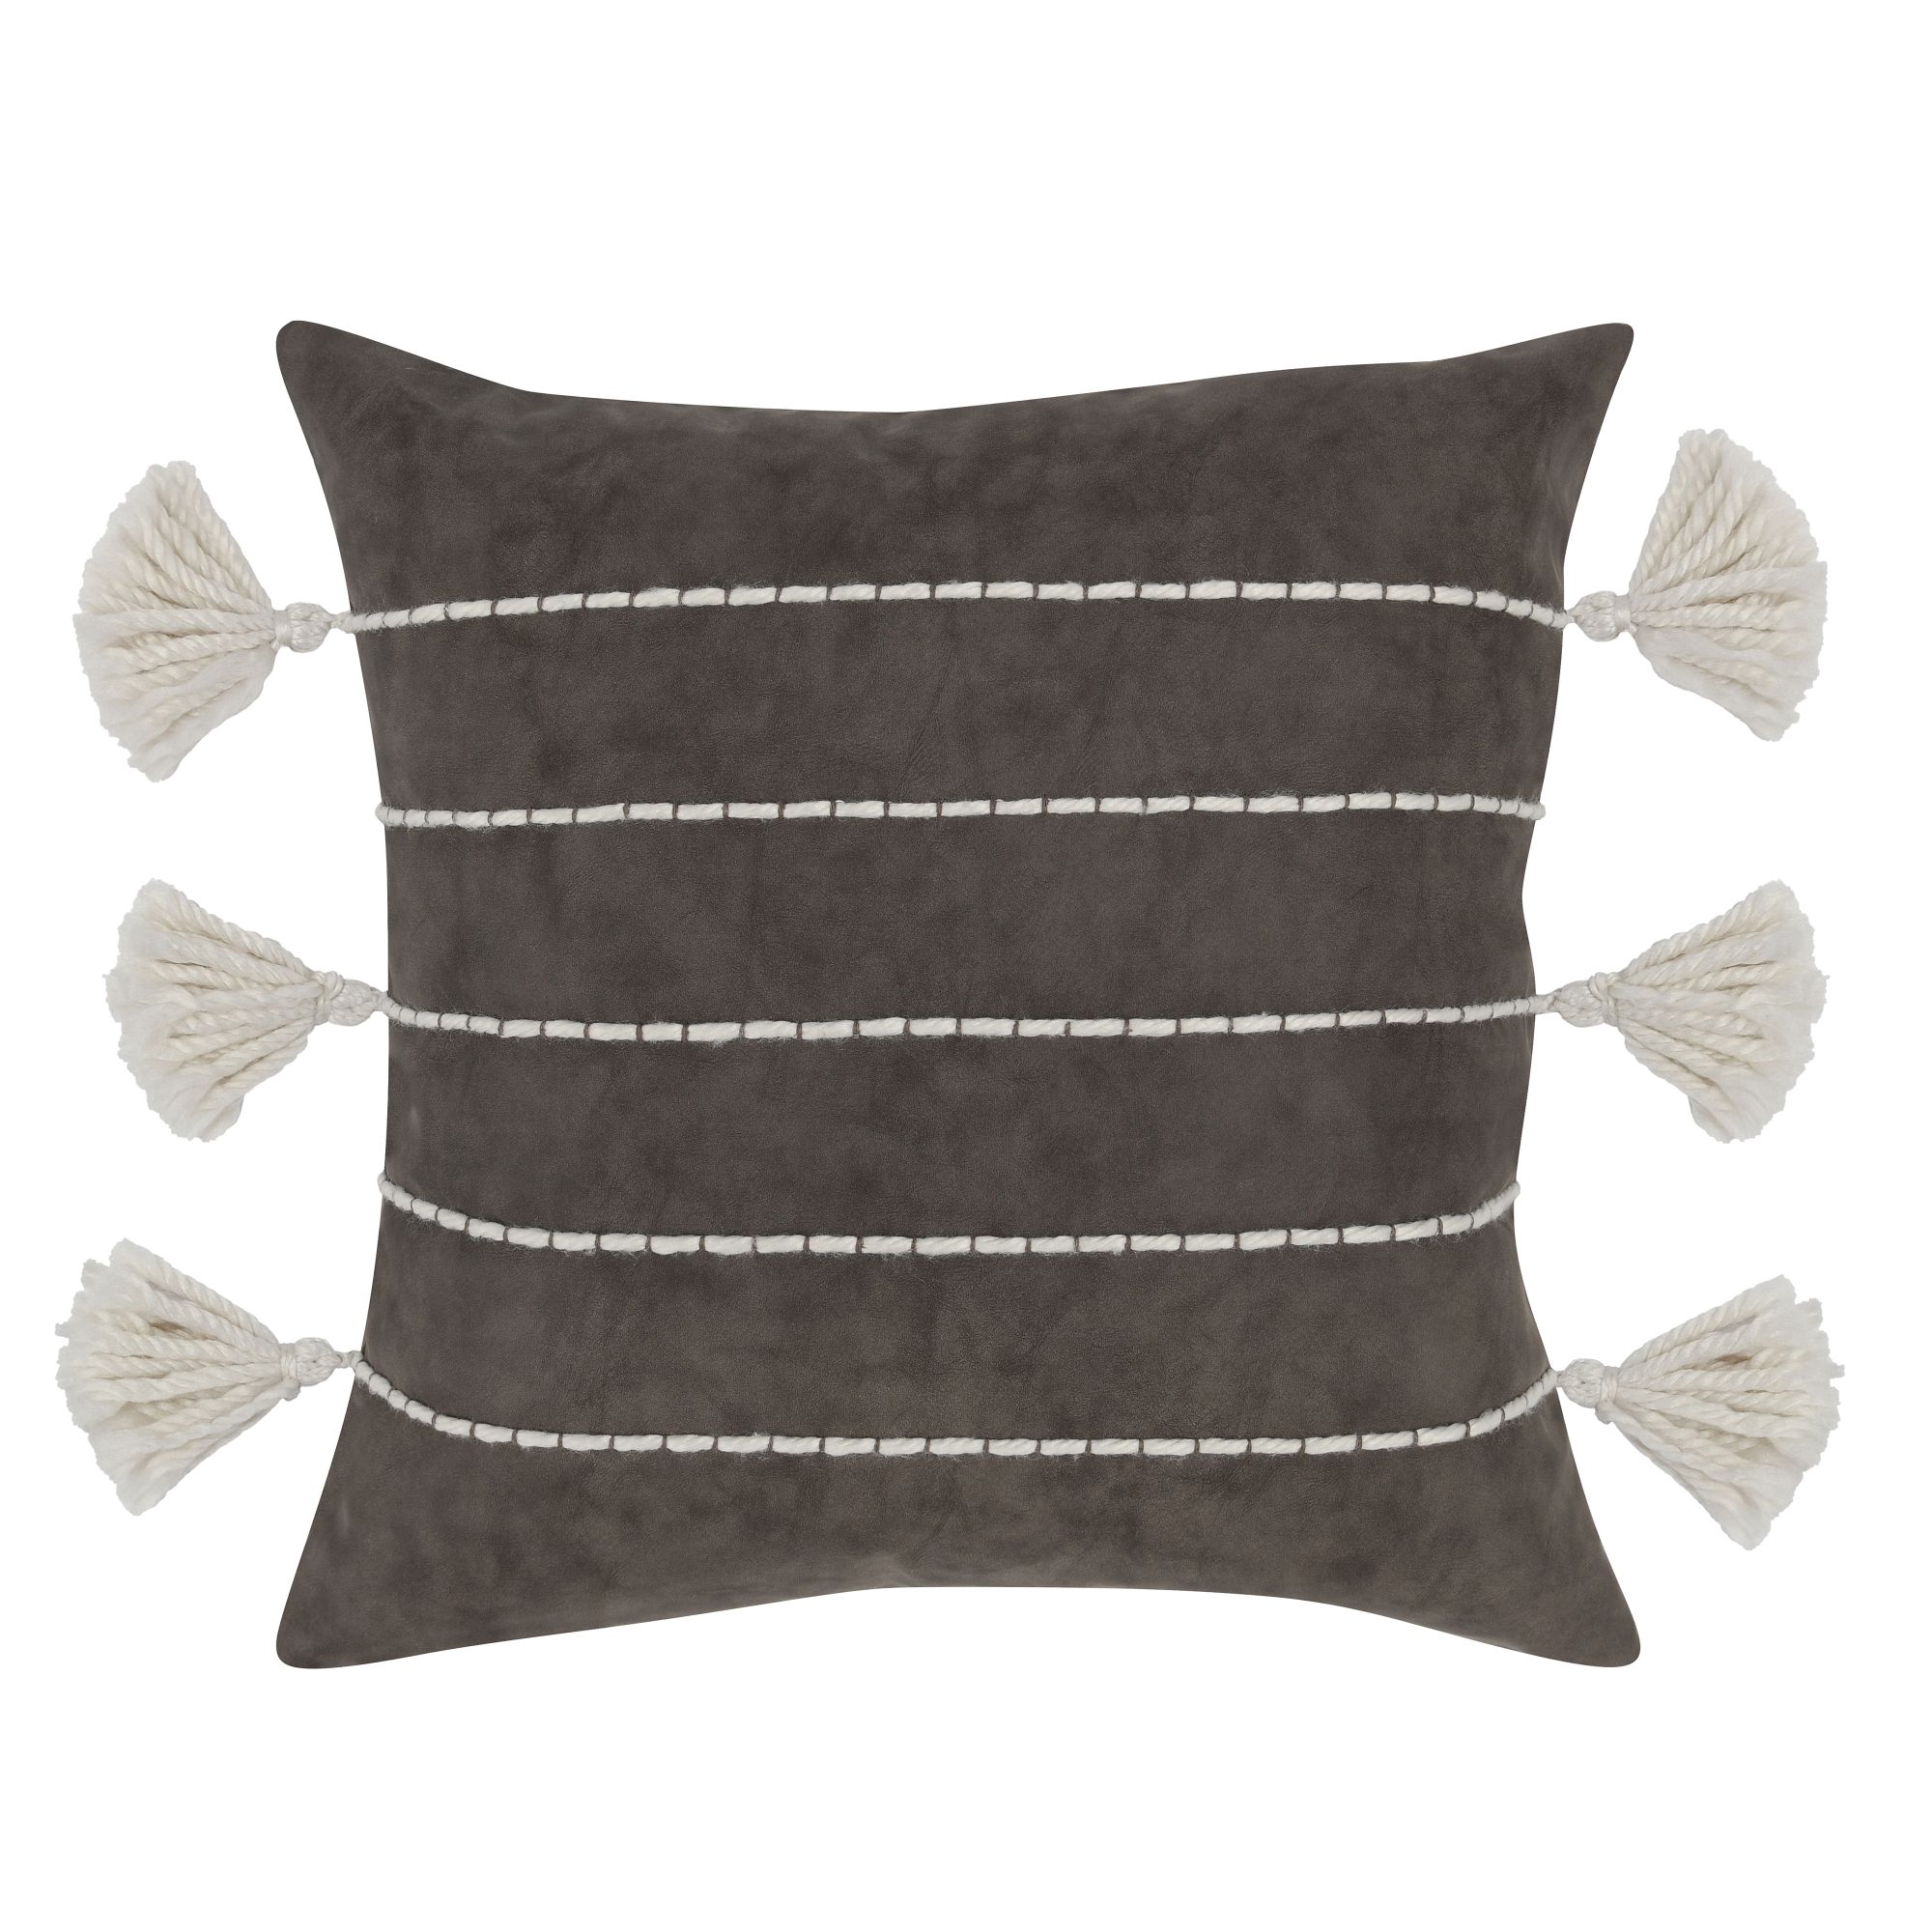 Howe Pillow Cover